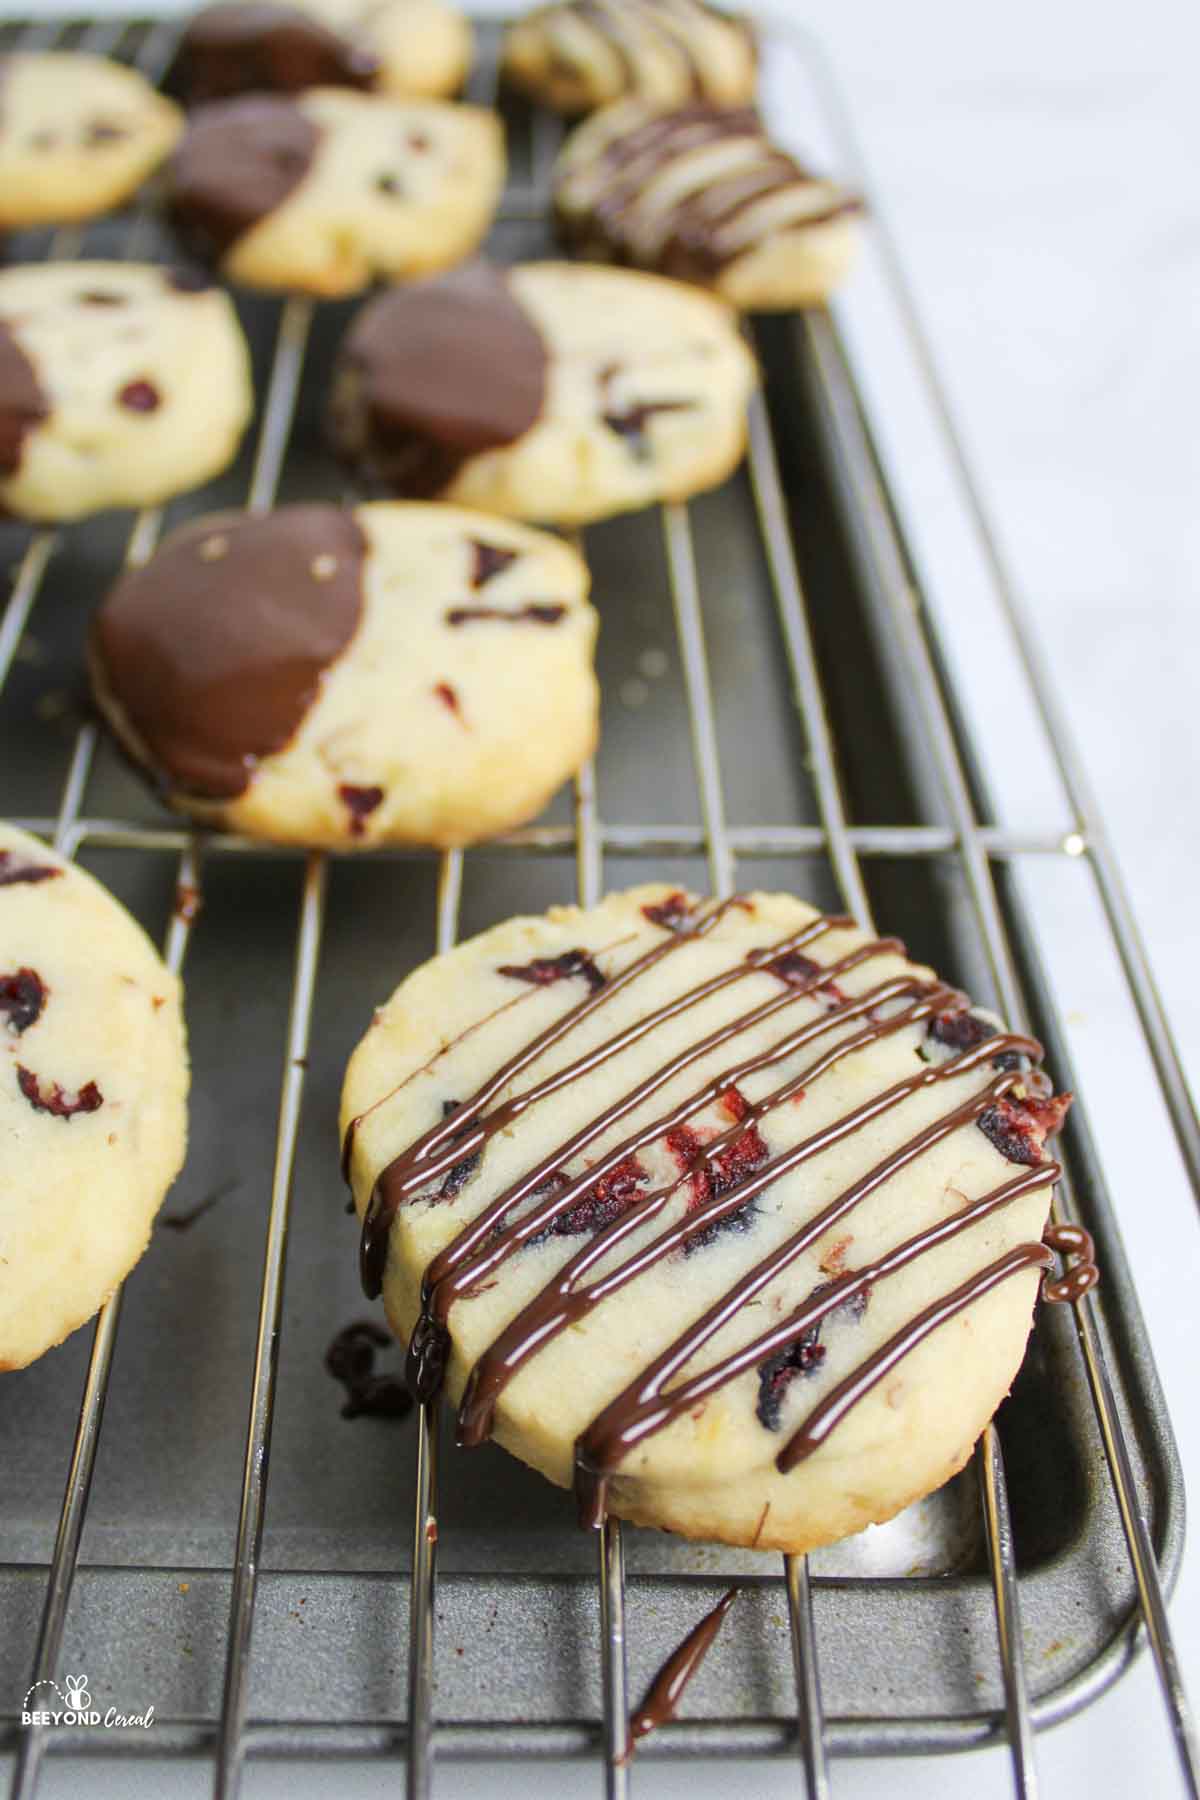 chocolate dipped and drizzled shortbread cookies on wire rack over cookiesheet.